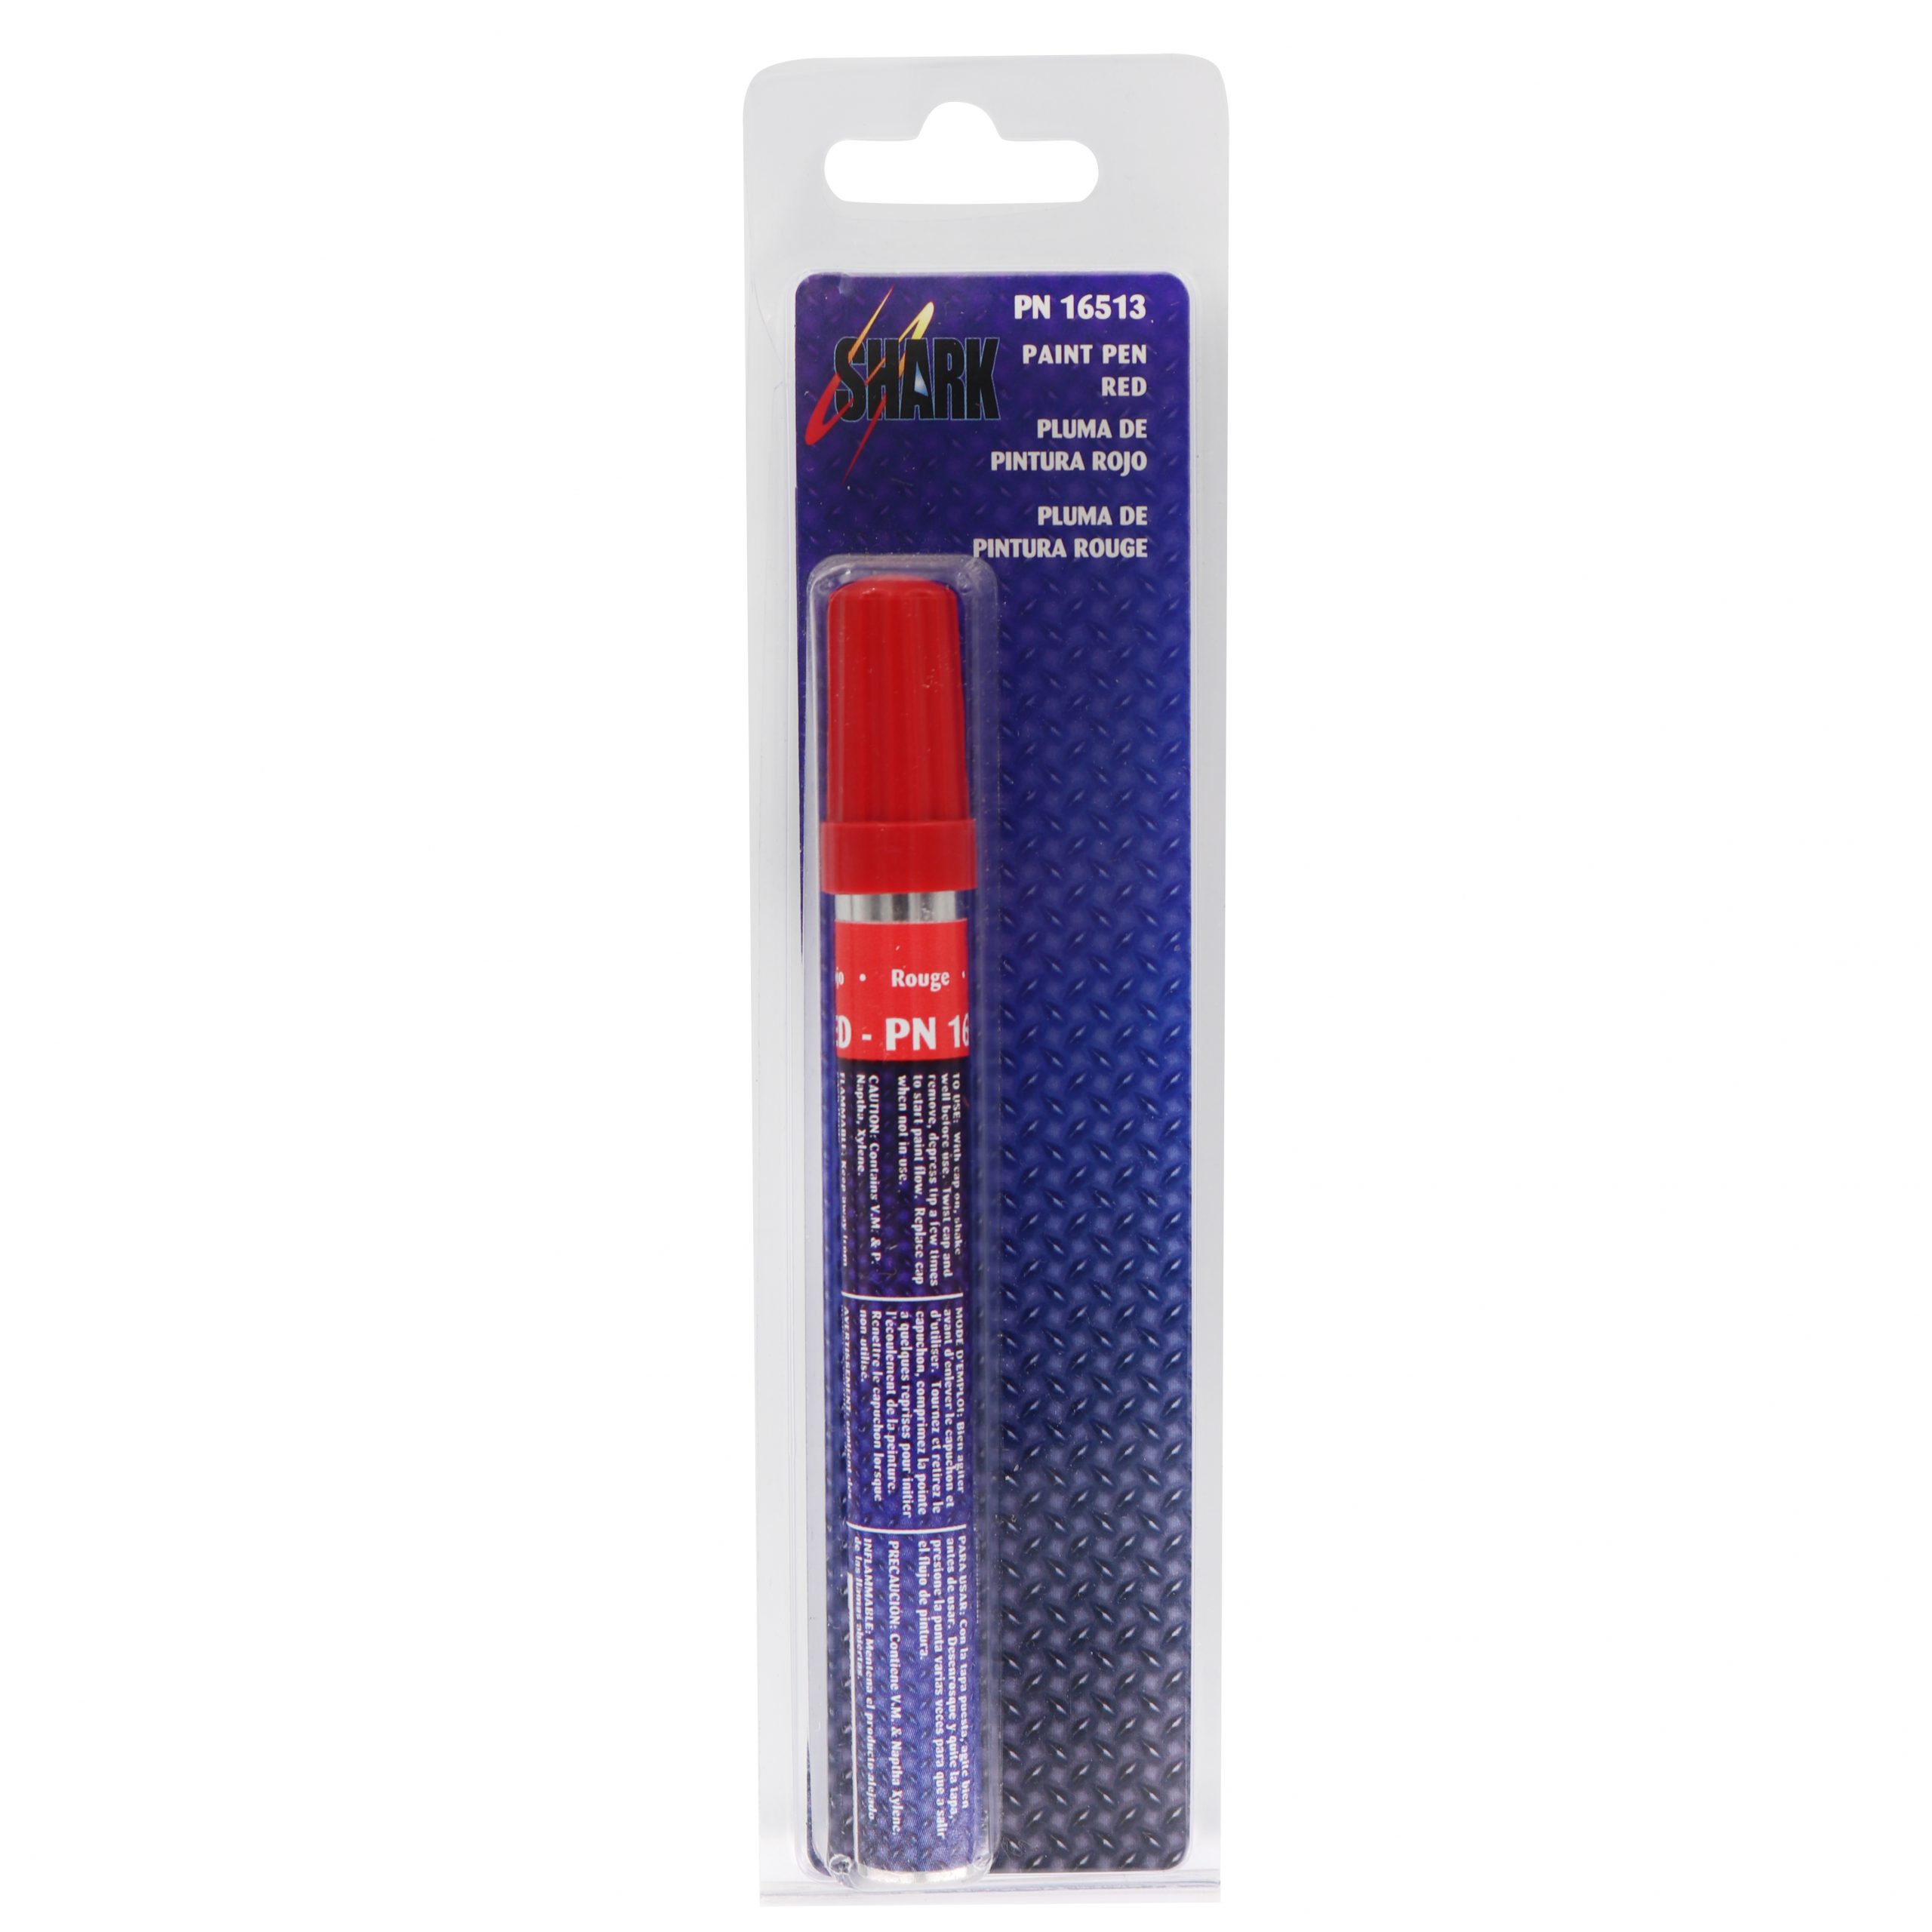 Paint Pen (Red) in Clamshell Packaging - Shark Industries